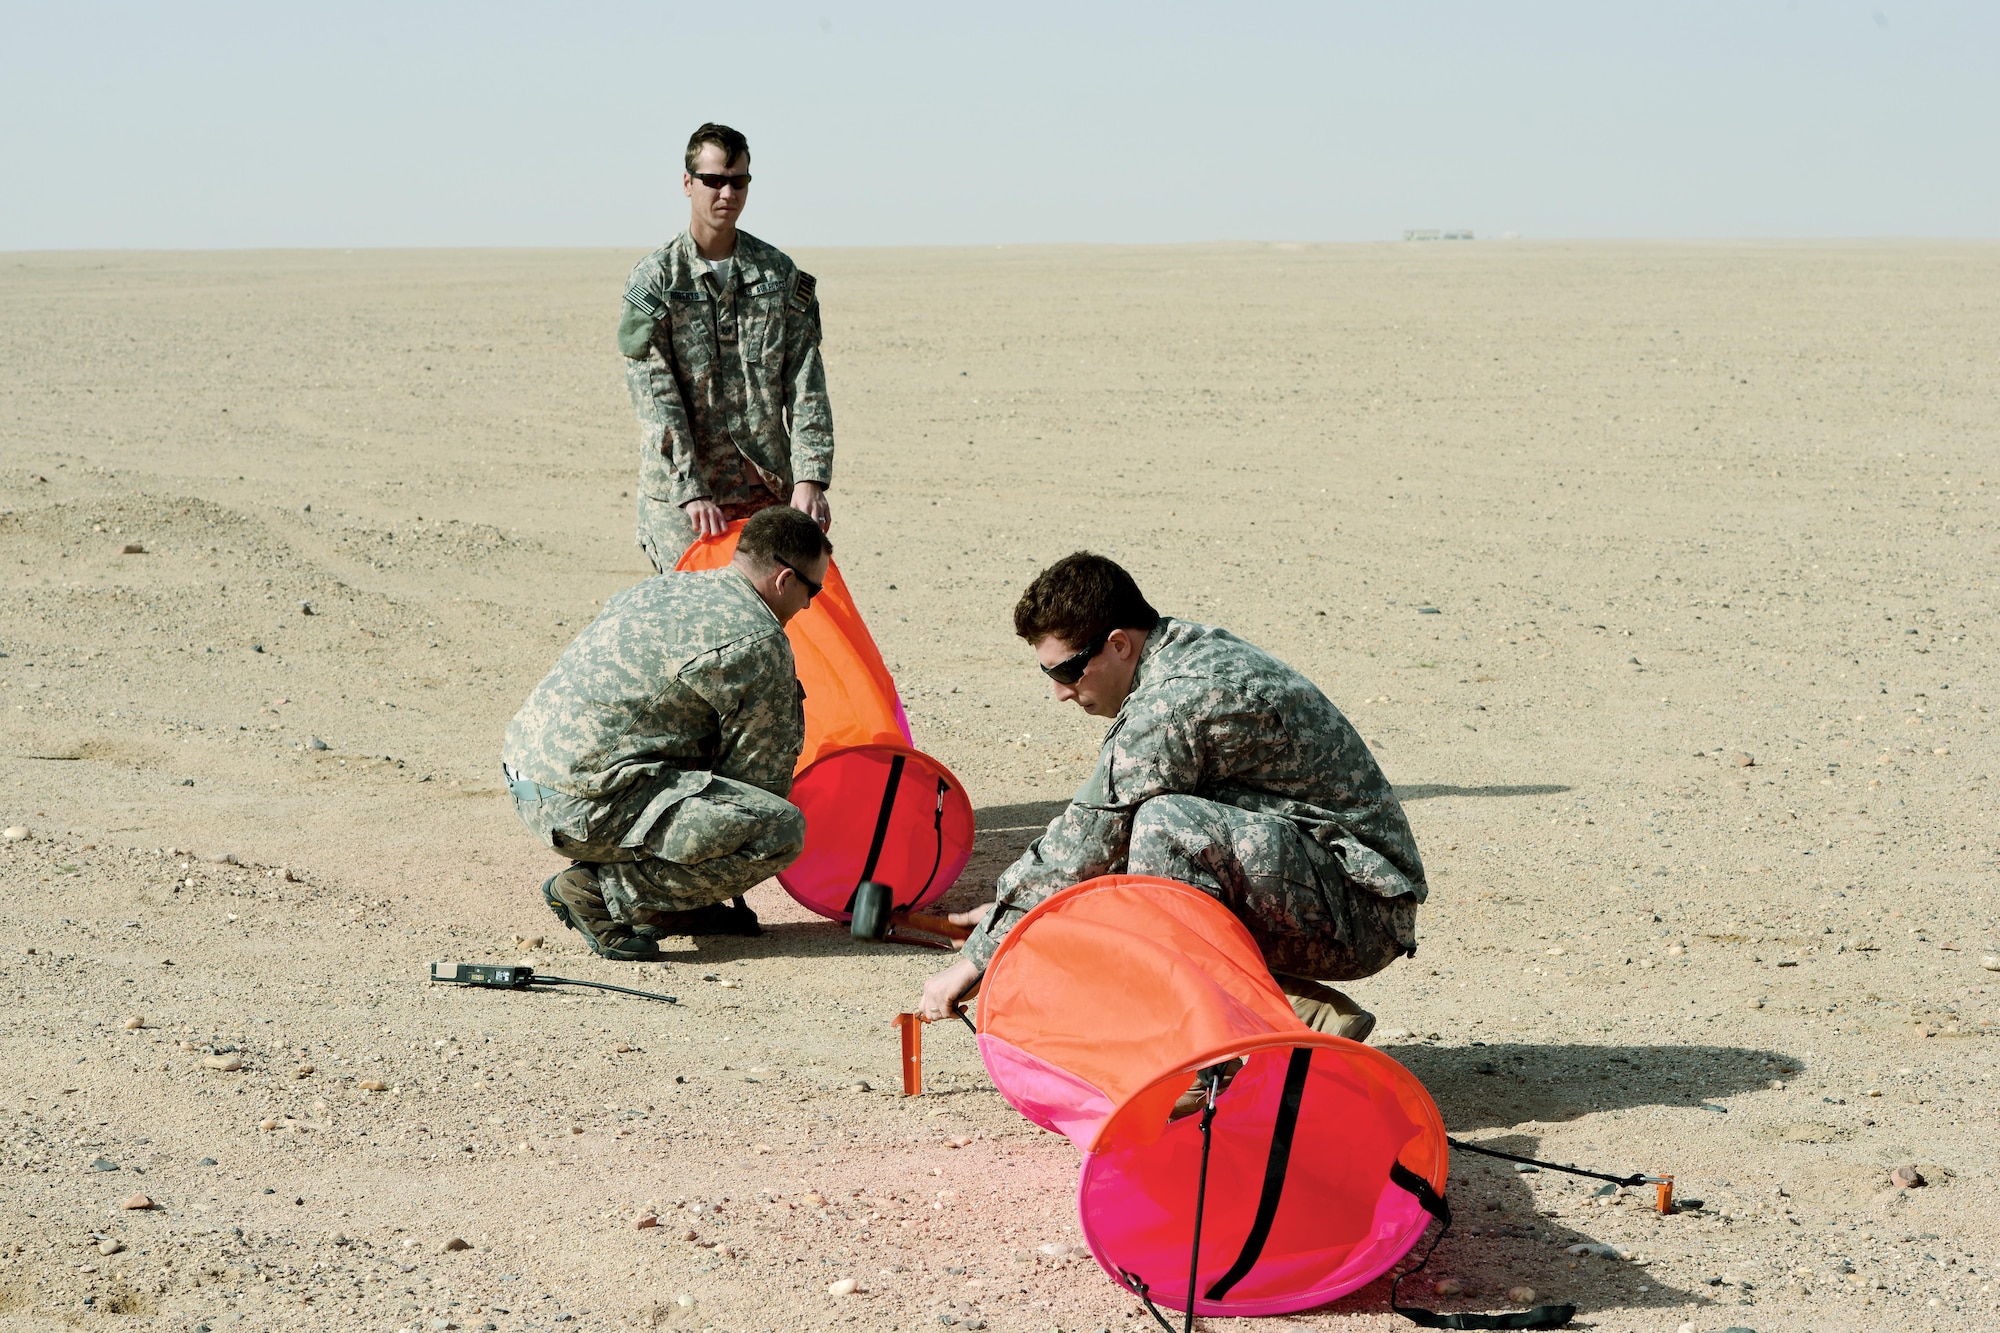 SOUTHWEST ASIA - Airmen from the 82nd Expeditionary Air Support Operations Squadron build a target during drop zone control officer training Feb. 10, 2015. The 737th Expeditionary Airlift Squadron here helped the 82nd EASOS Airmen practice calling in aircraft for resupply drops. (U.S. Air Force photo by Tech. Sgt. Jared Marquis/released)